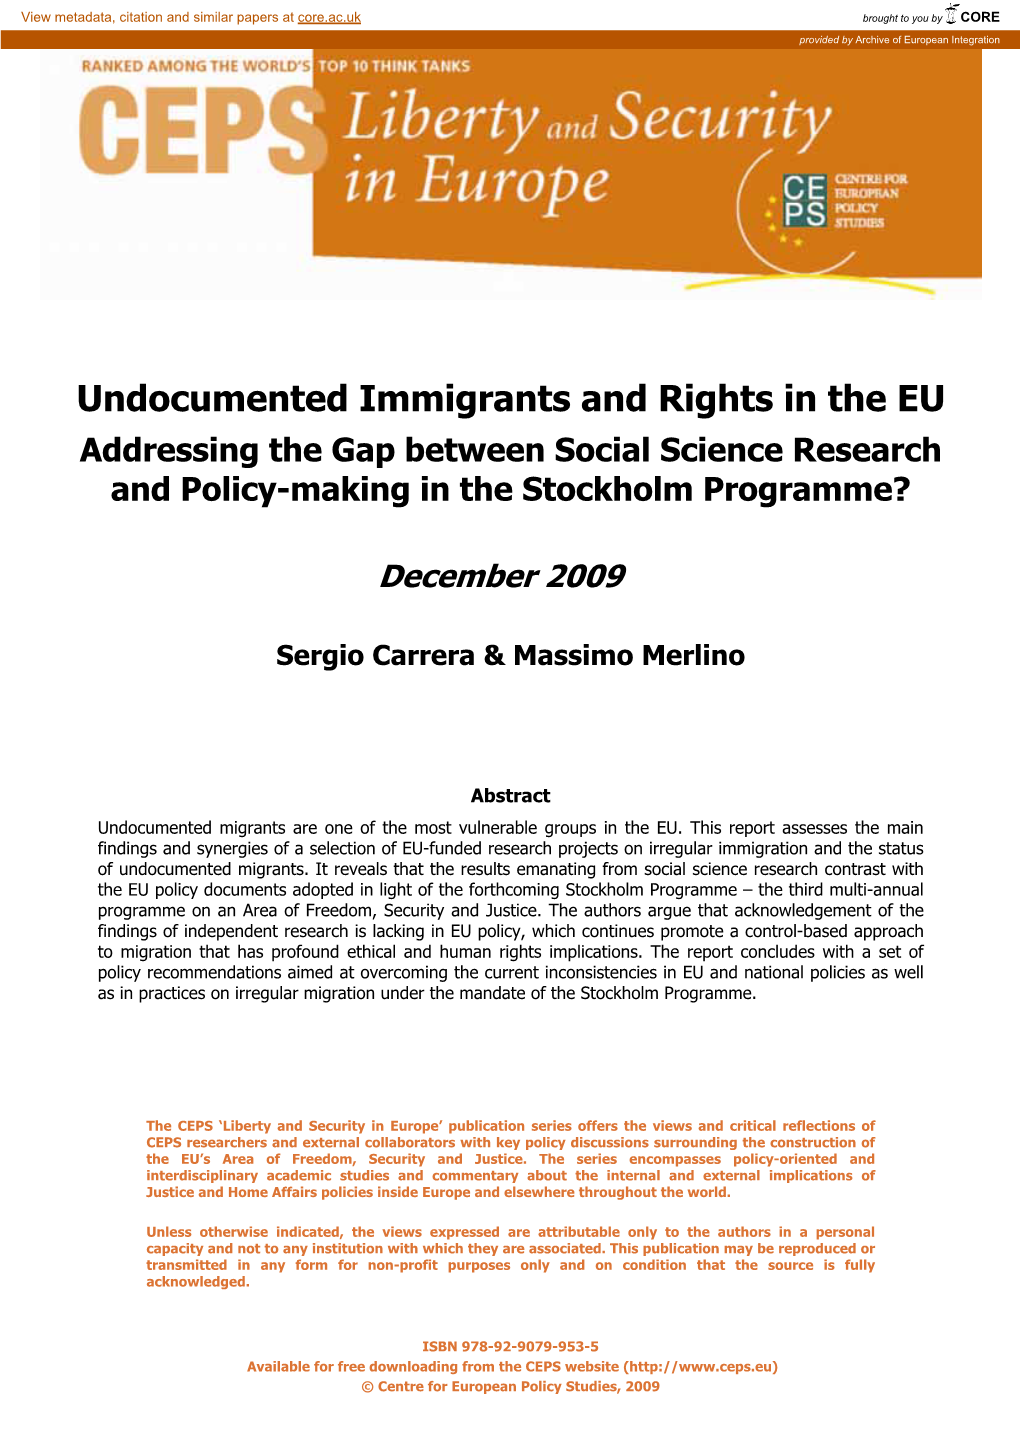 Undocumented Immigrants and Rights in the EU Addressing the Gap Between Social Science Research and Policy-Making in the Stockholm Programme?